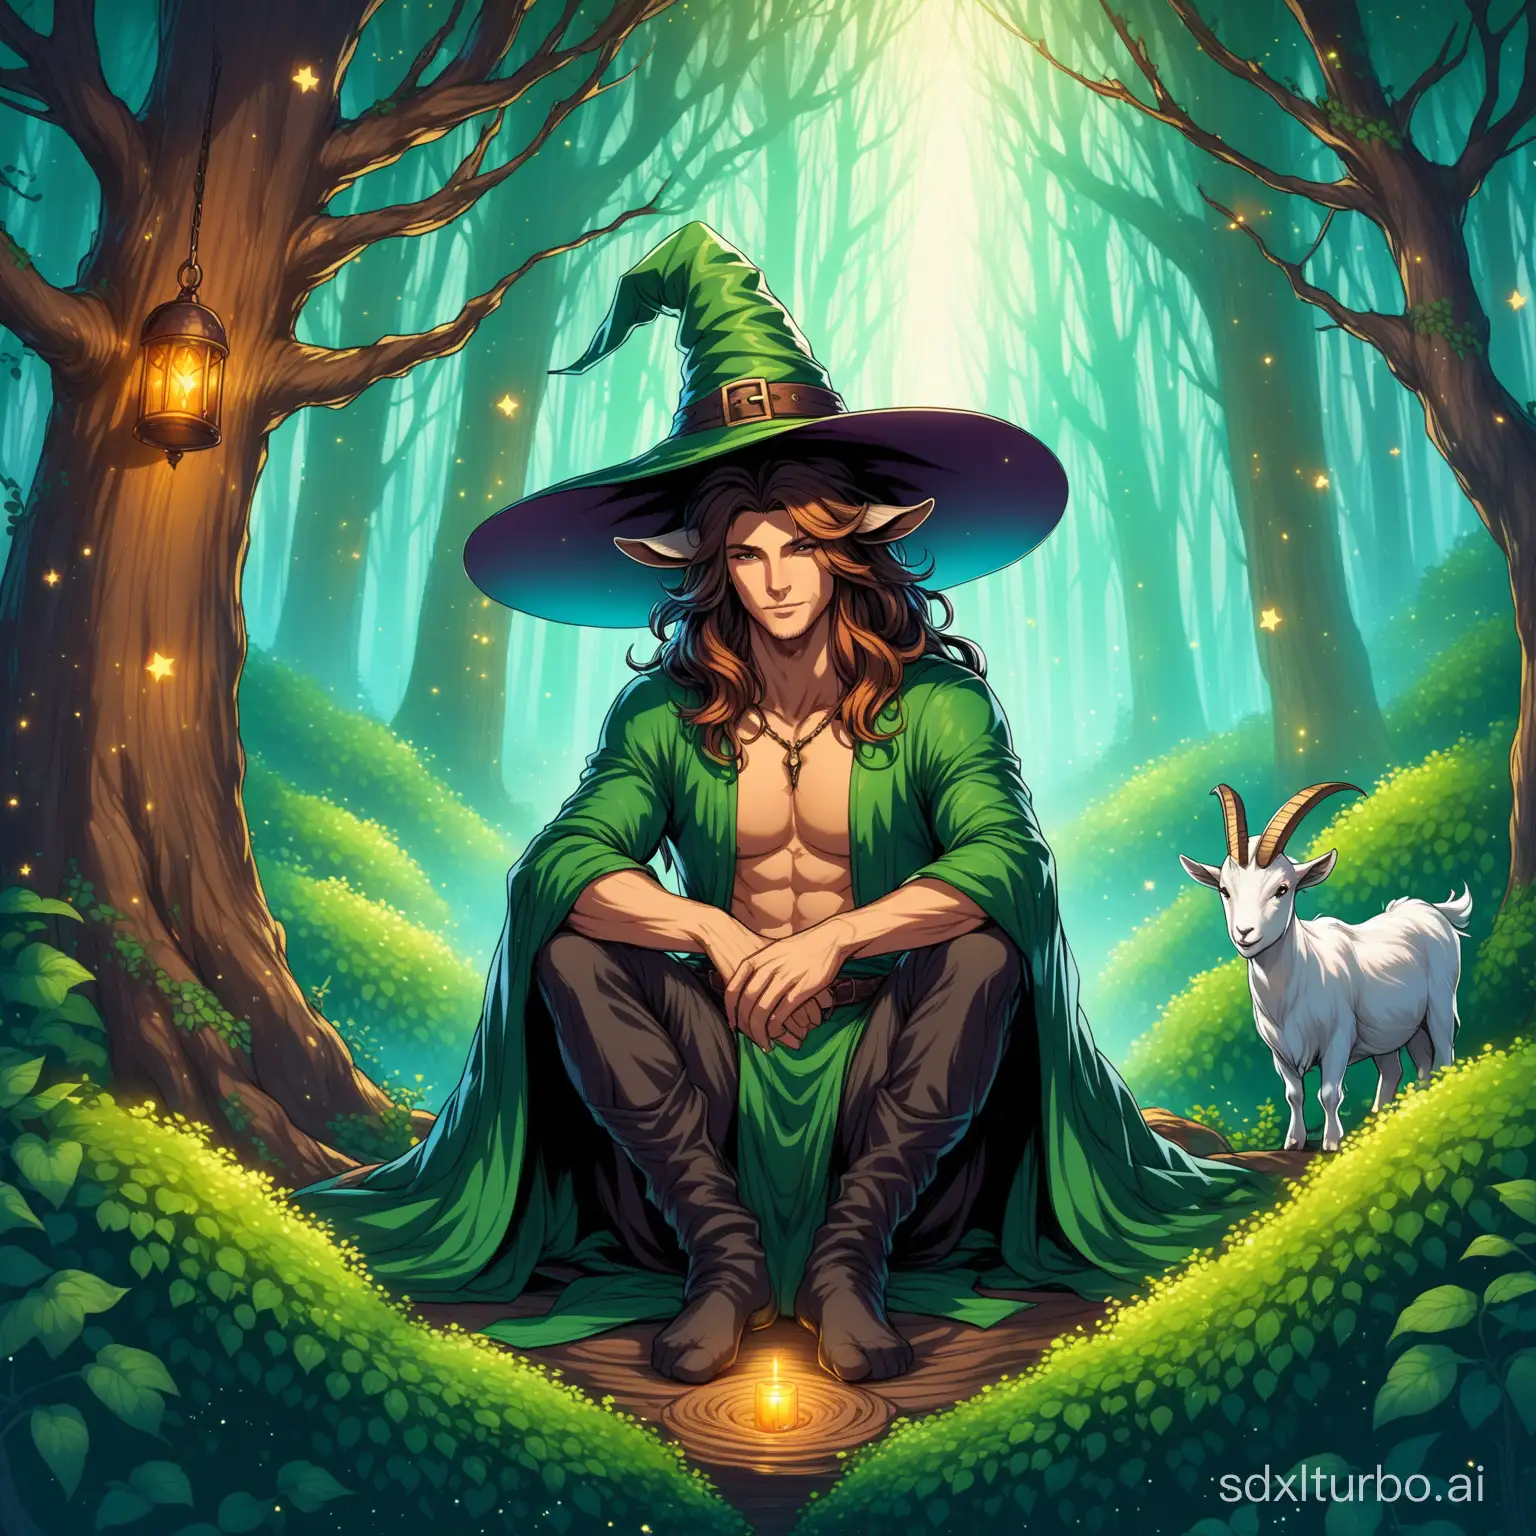 Chad male goat with witch hat and luscious hair, sitting inside backdrop of a magical forest, fantasy style